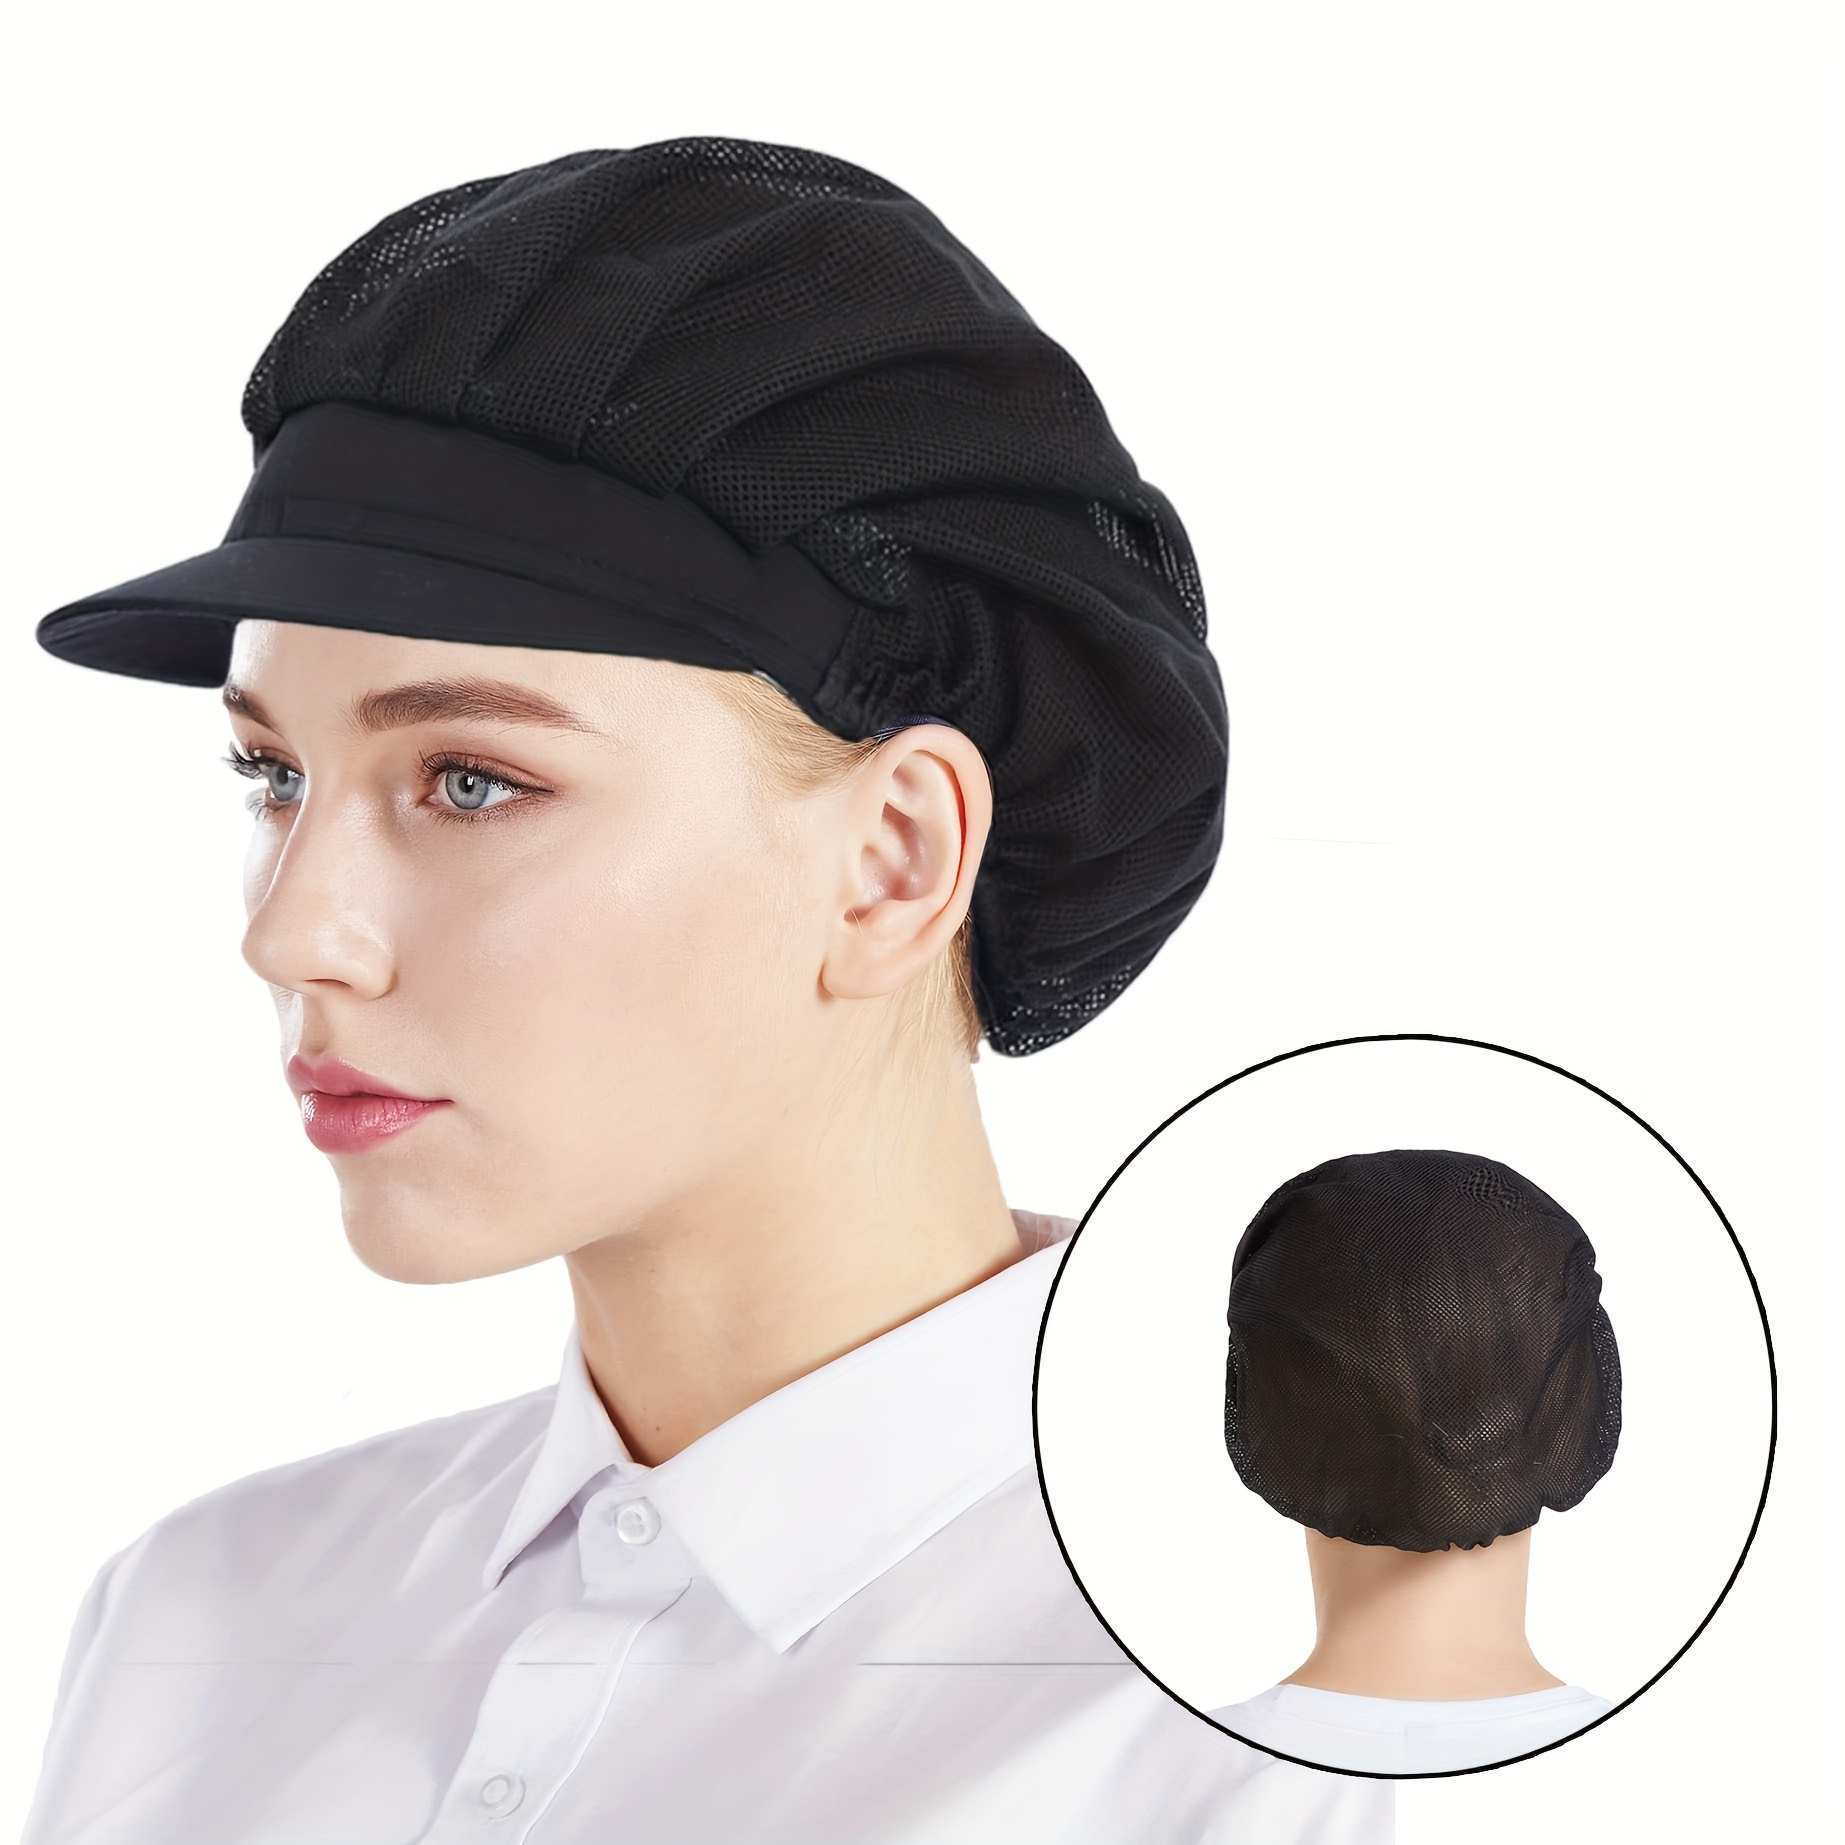 professional mesh chef hat black breathable pleated hat elastic adjustable fit comfortable lightweight cooking cap for kitchen food service staff